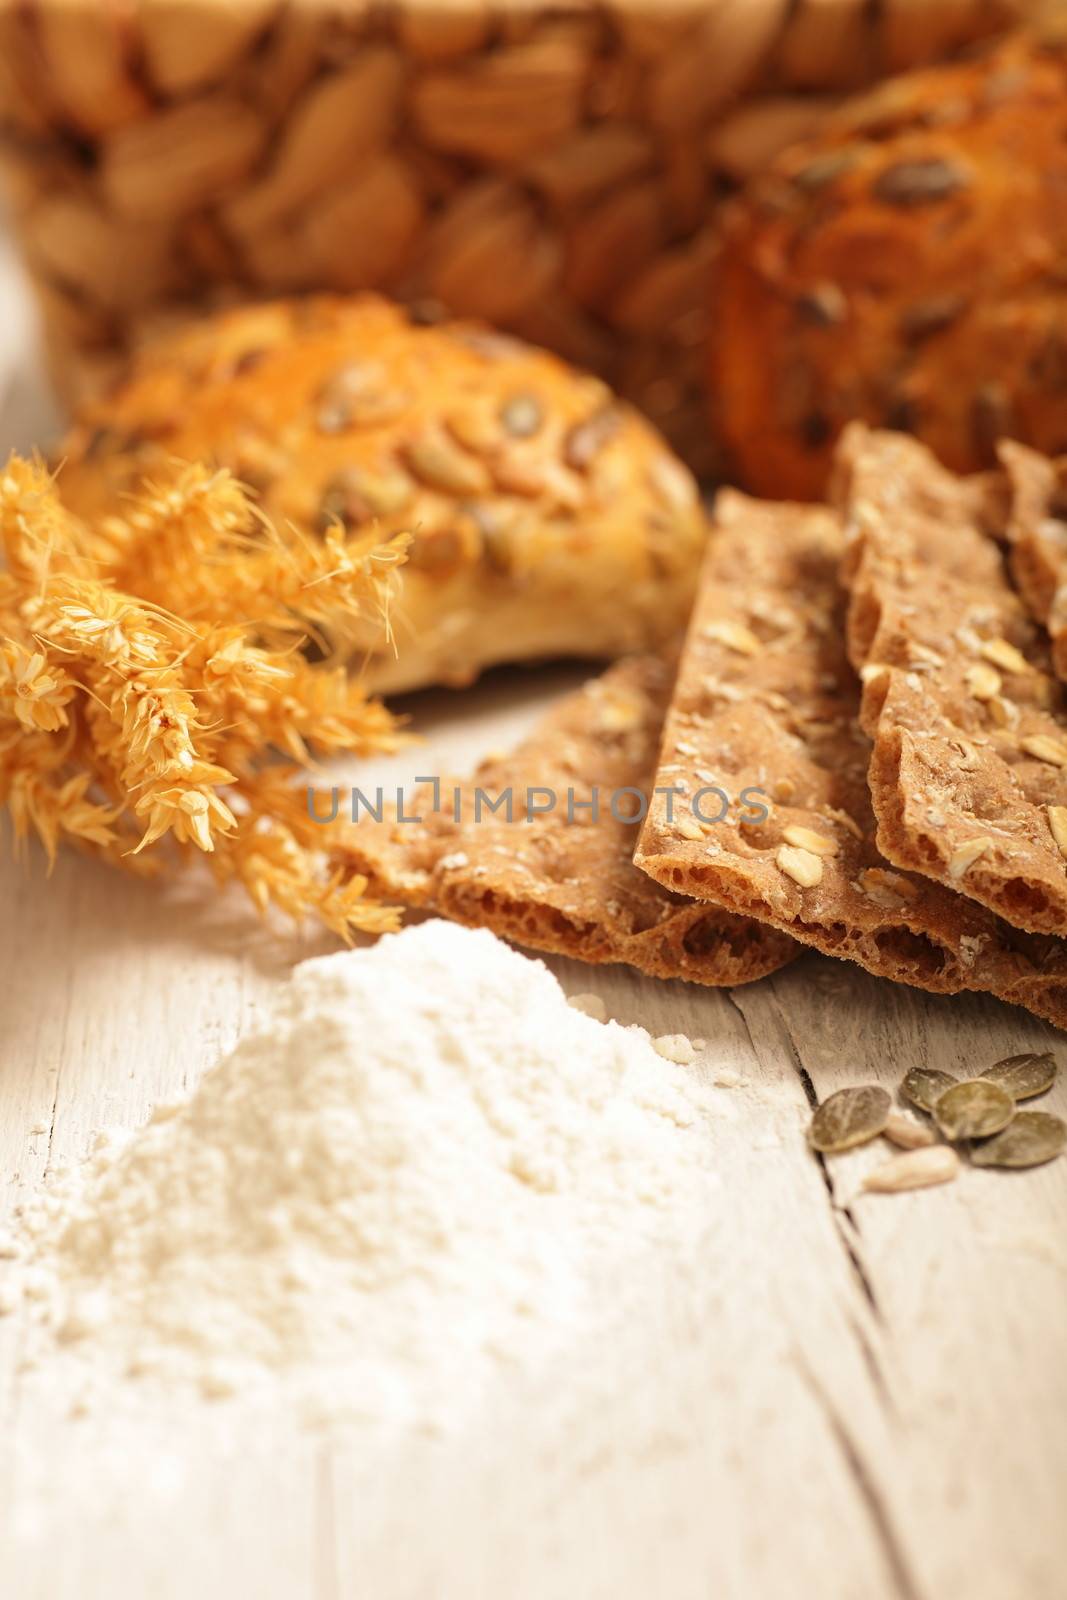 Still life display of wheat ingredients and products including ground flour, ears of ripe wheat, crispbread and delicious freshly baked golden rolls